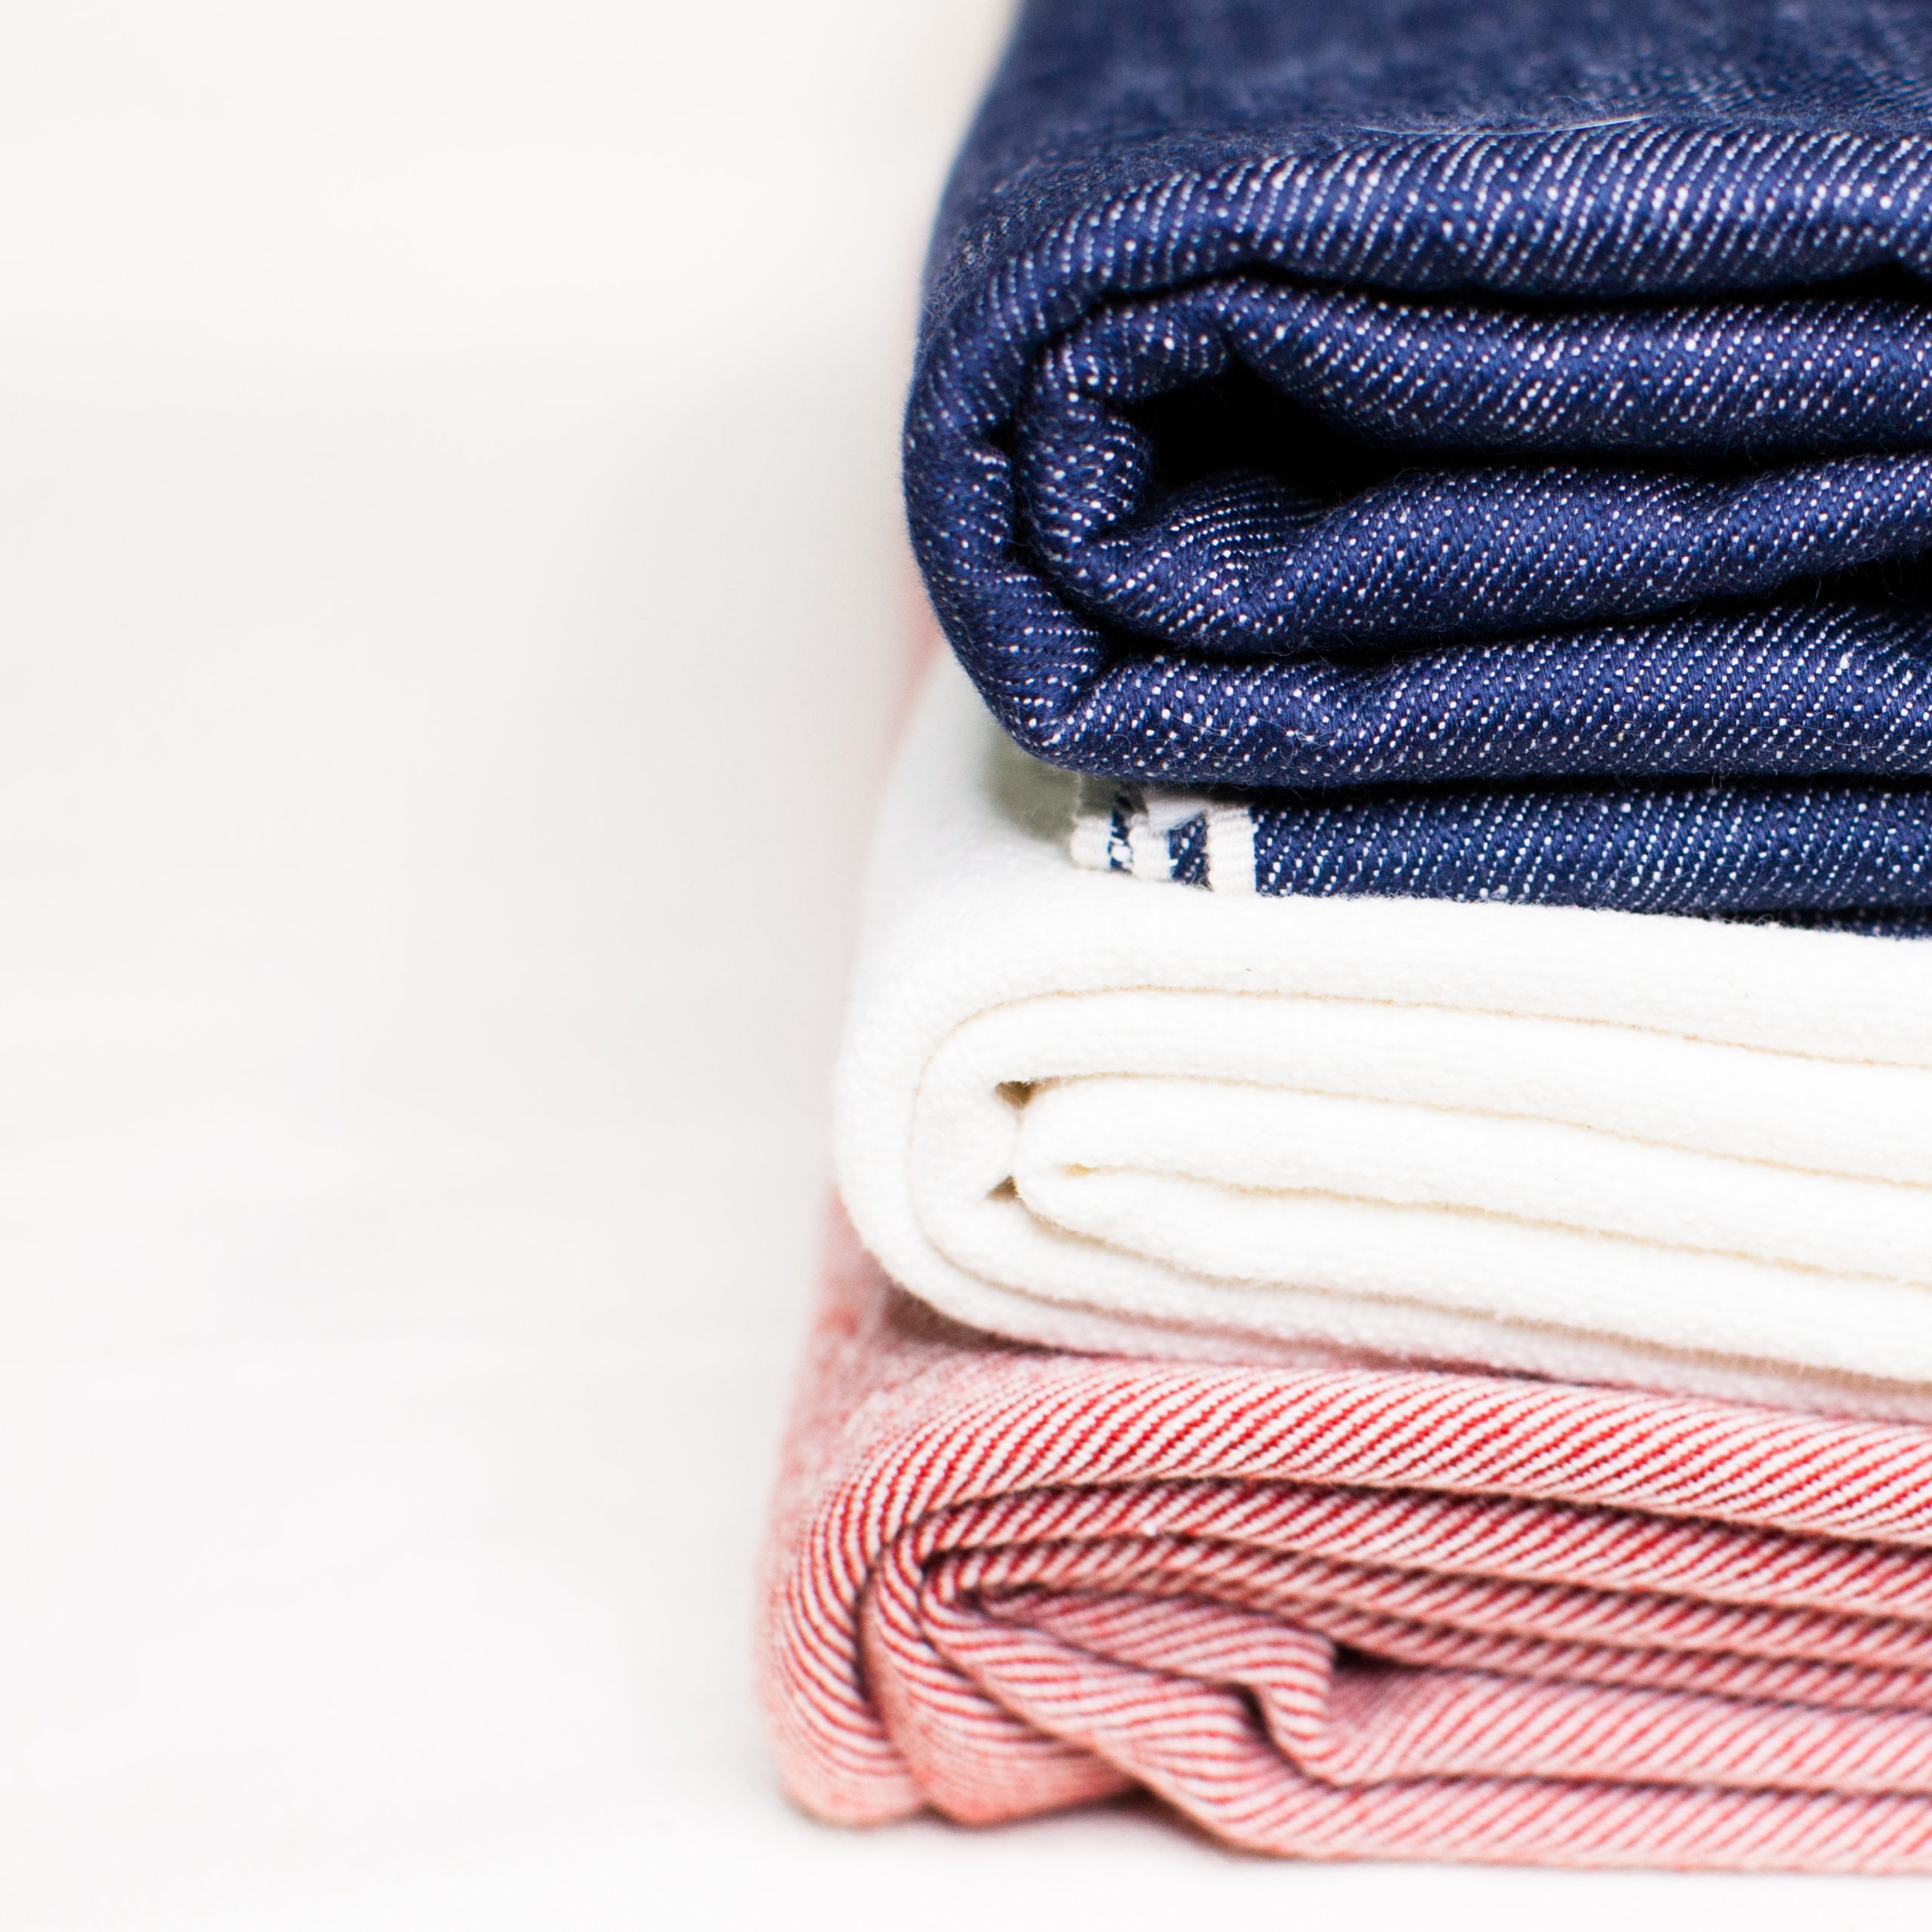 color photography of blue white red selvedge textiles stacked